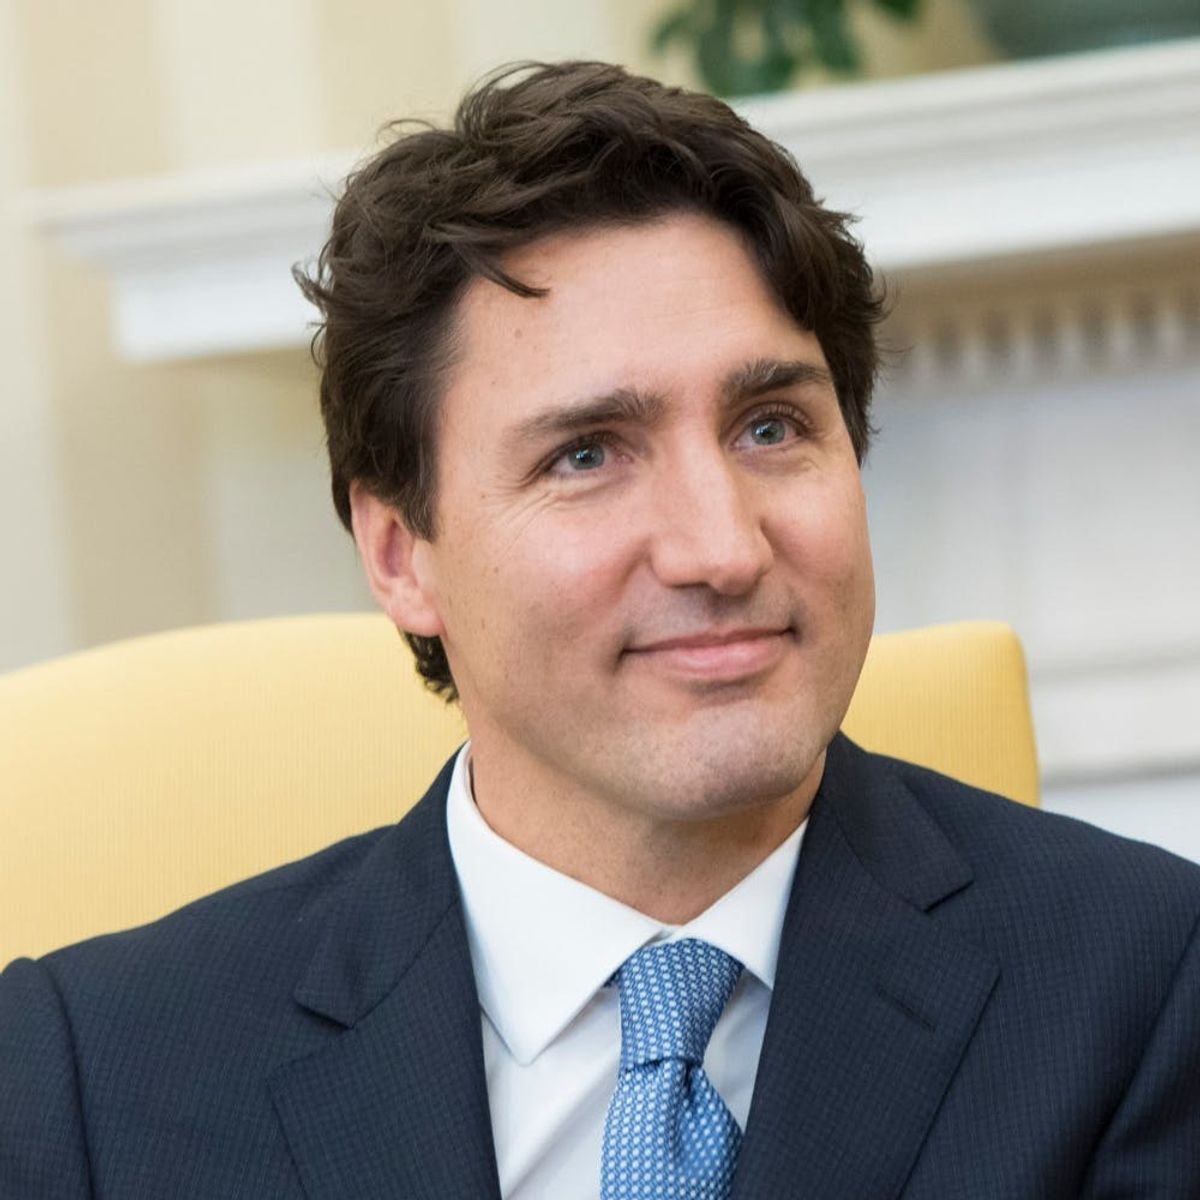 Justin Trudeau’s Hottest Pics Are Taking Over Twitter, Proving the Thirst Is Real